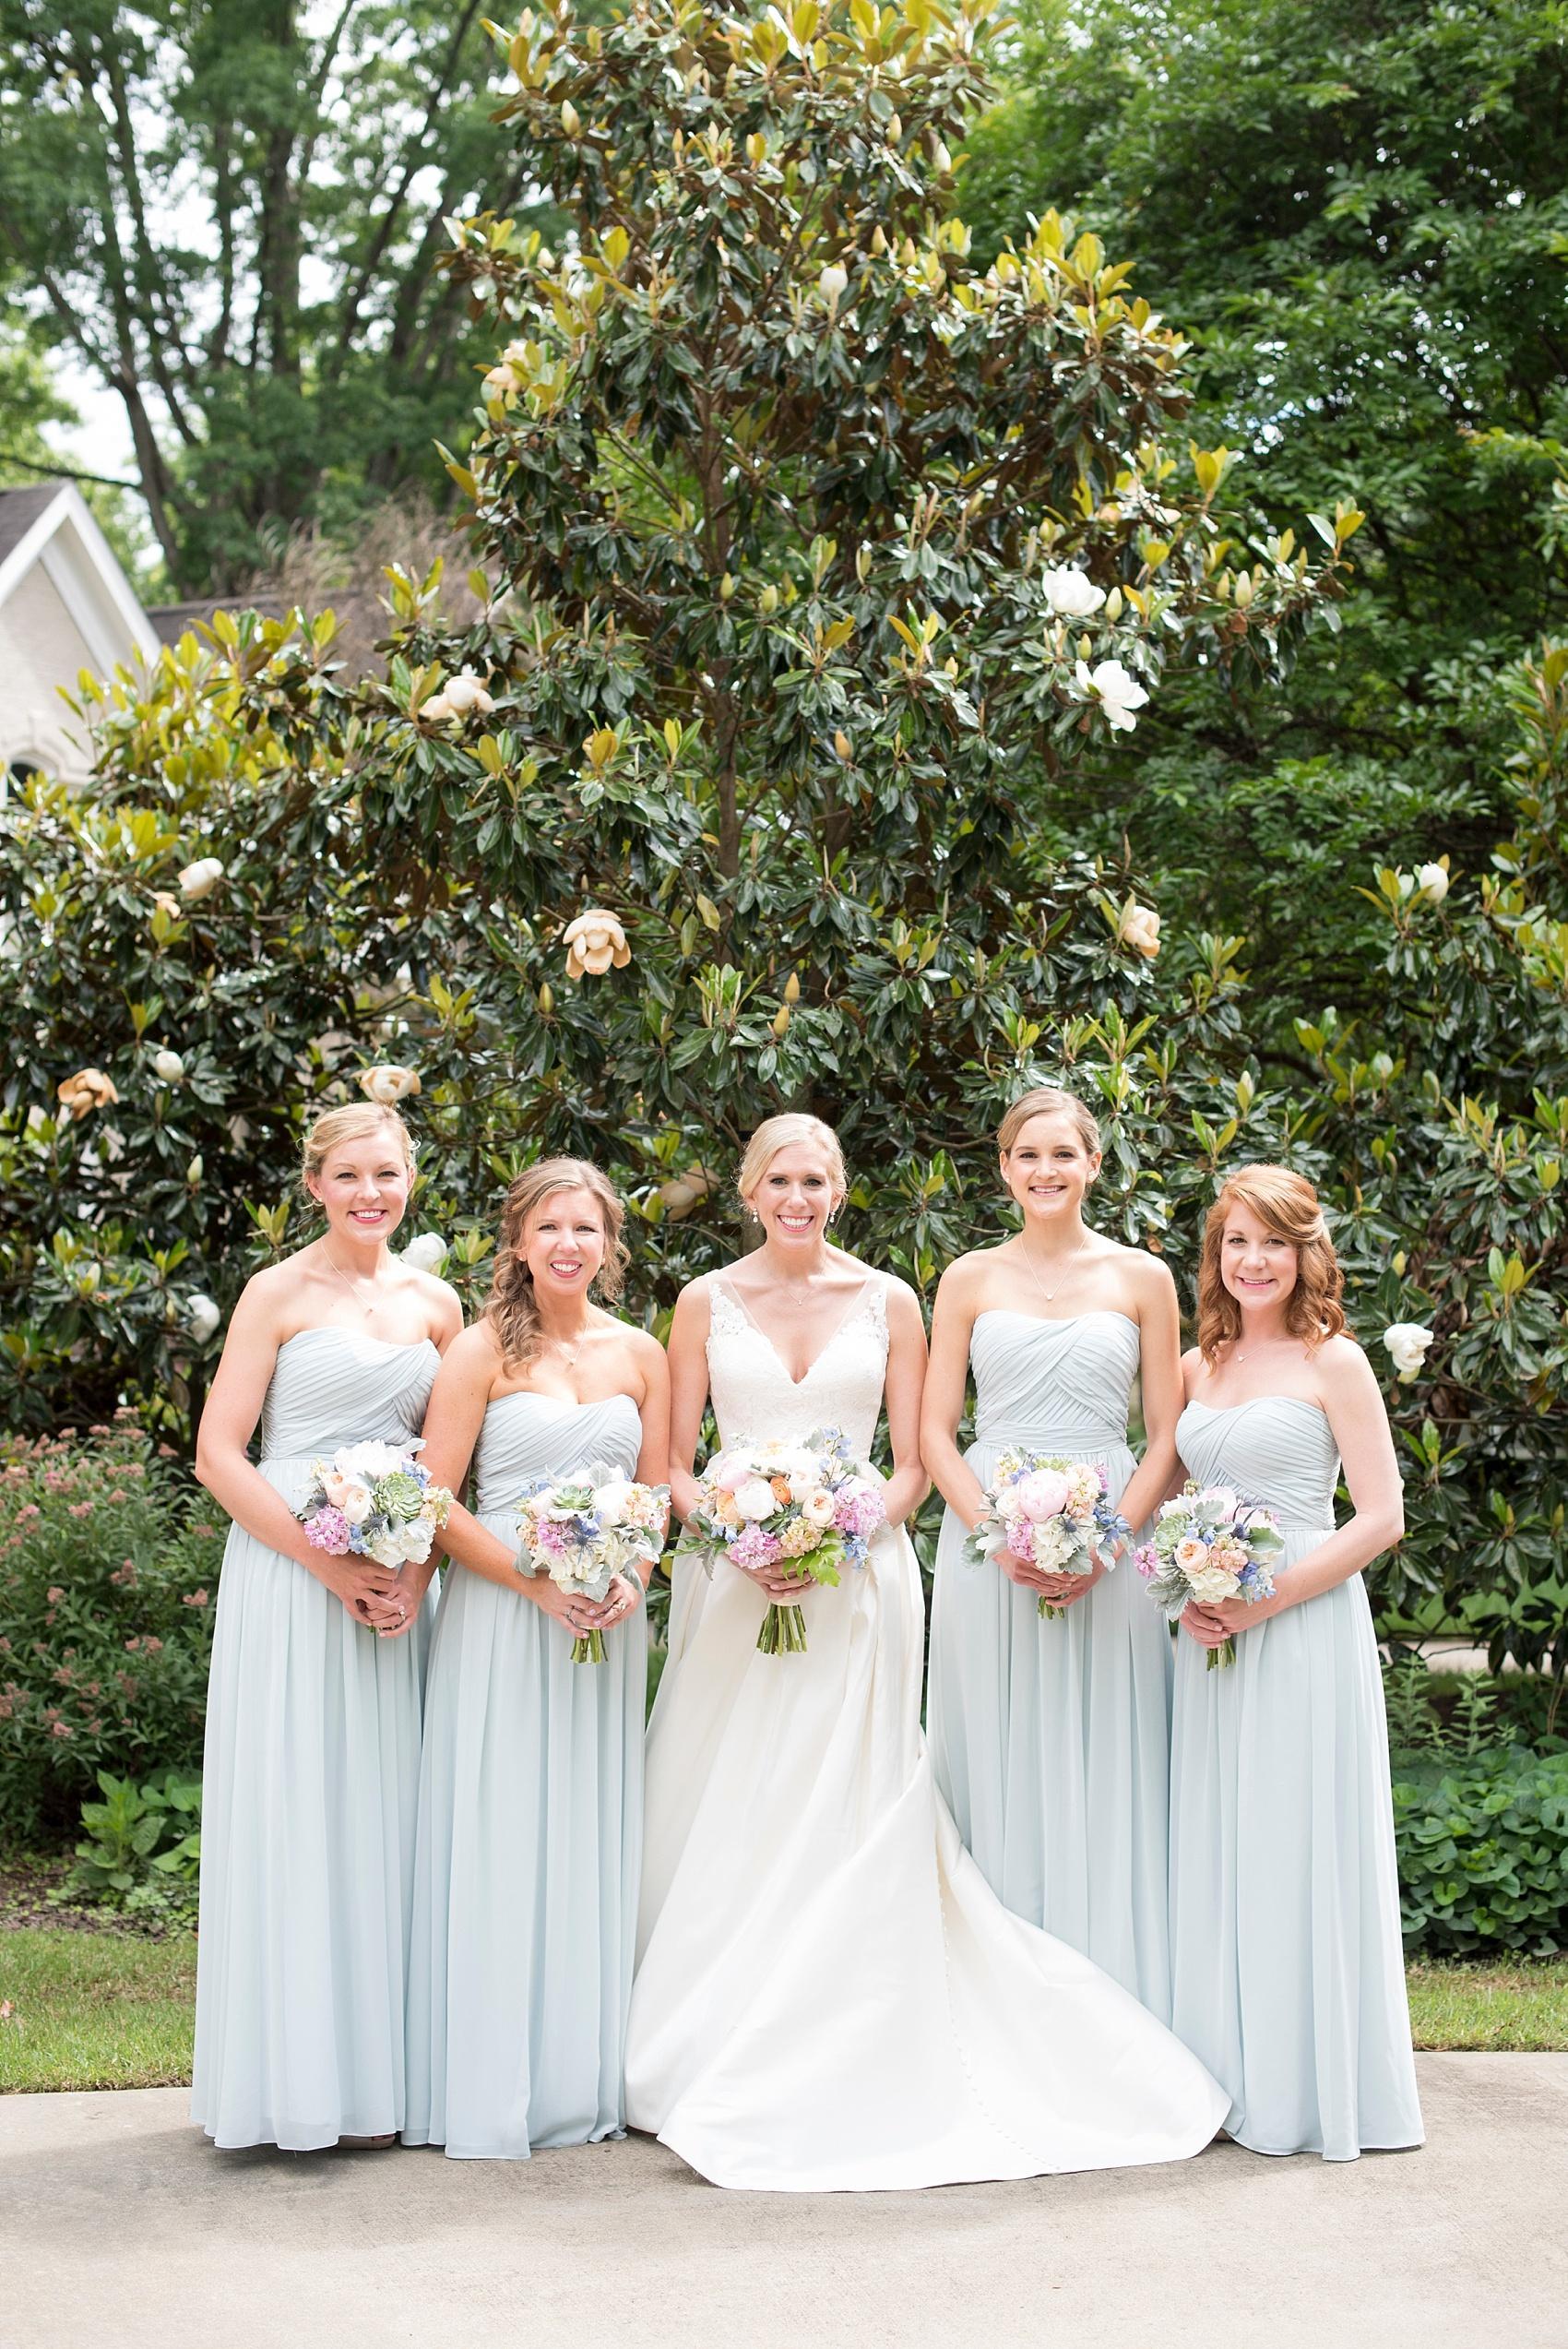 Mikkel Paige Photography pictures of a wedding in downtown Raleigh. Photo of the bride and her bridesmaids in strapless blue chiffon gowns.